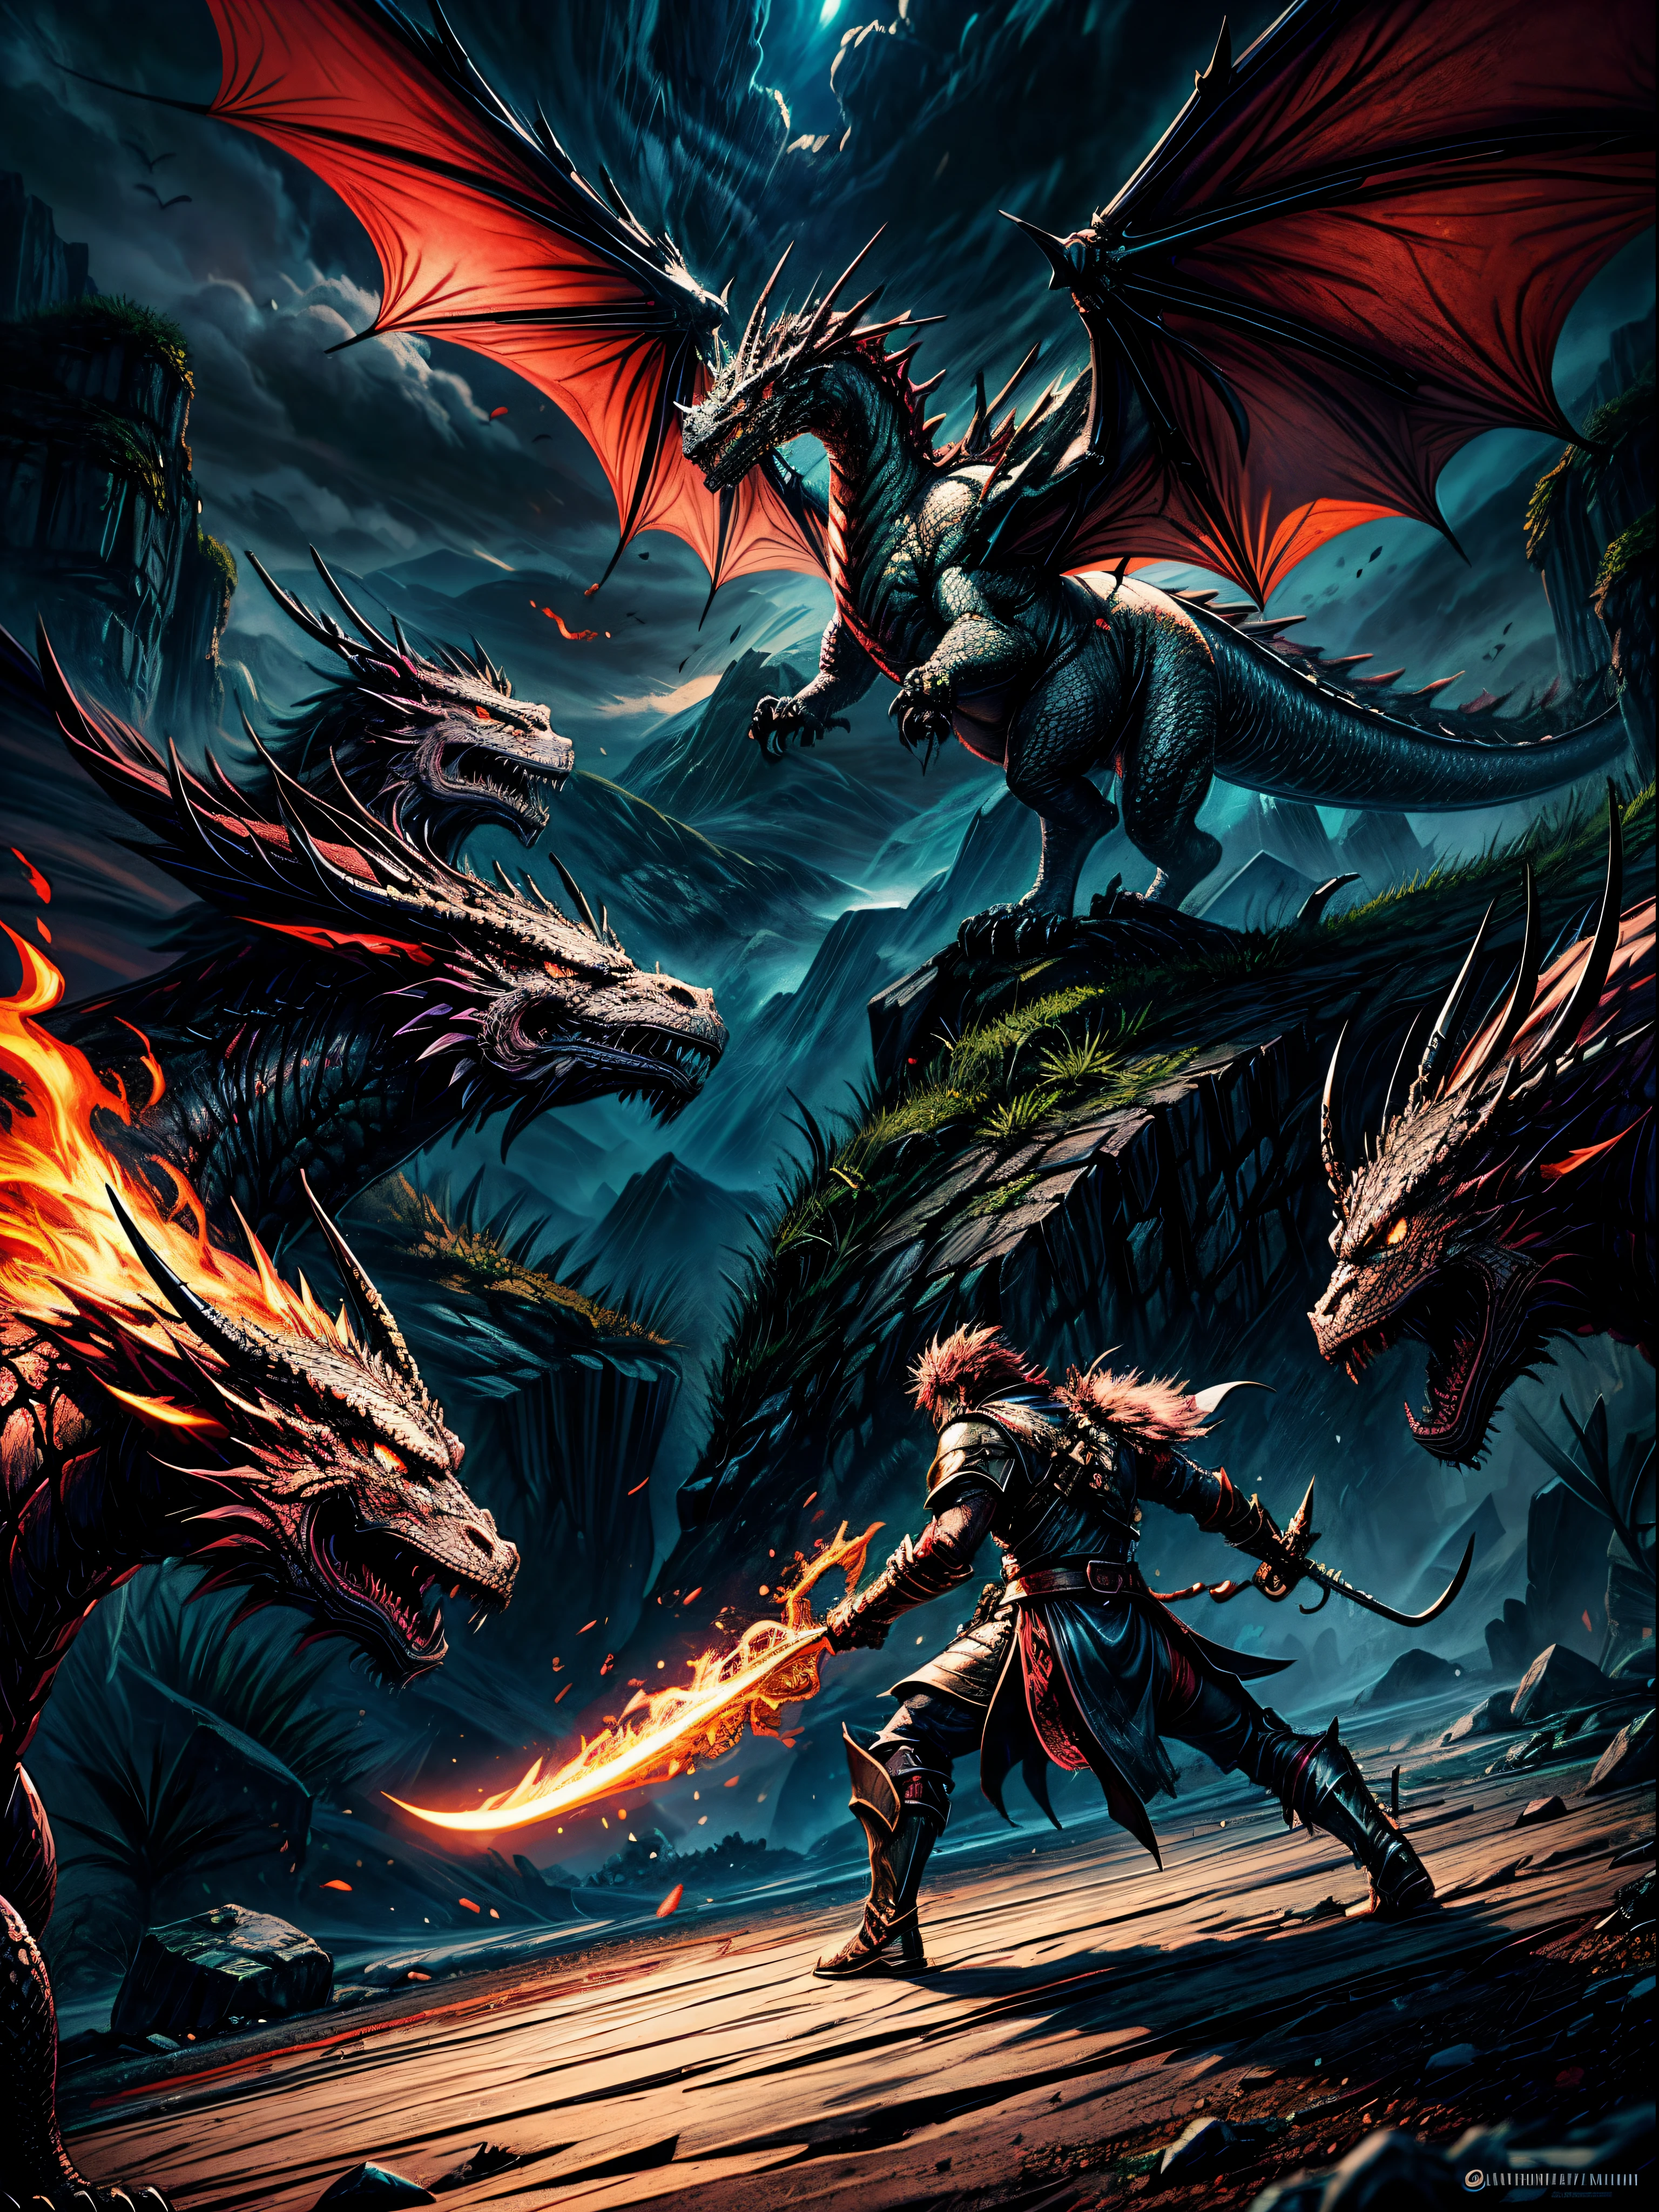 Create a digital art masterpiece depicting a fearless and battle-worn dragon slayer standing defiantly before an imposing, fire-breathing dragon. The dragon slayer should exude confidence, wielding a legendary weapon with intricate details and adorned in battle-scarred armor. The dragon should be a formidable force, its scales reflecting the glow of its fiery breath. Set the scene against a dramatic backdrop that captures the intensity of this showdown between the last of the dragon slayers and the majestic beast, showcasing the clash of two legendary forces in an epic fantasy world.